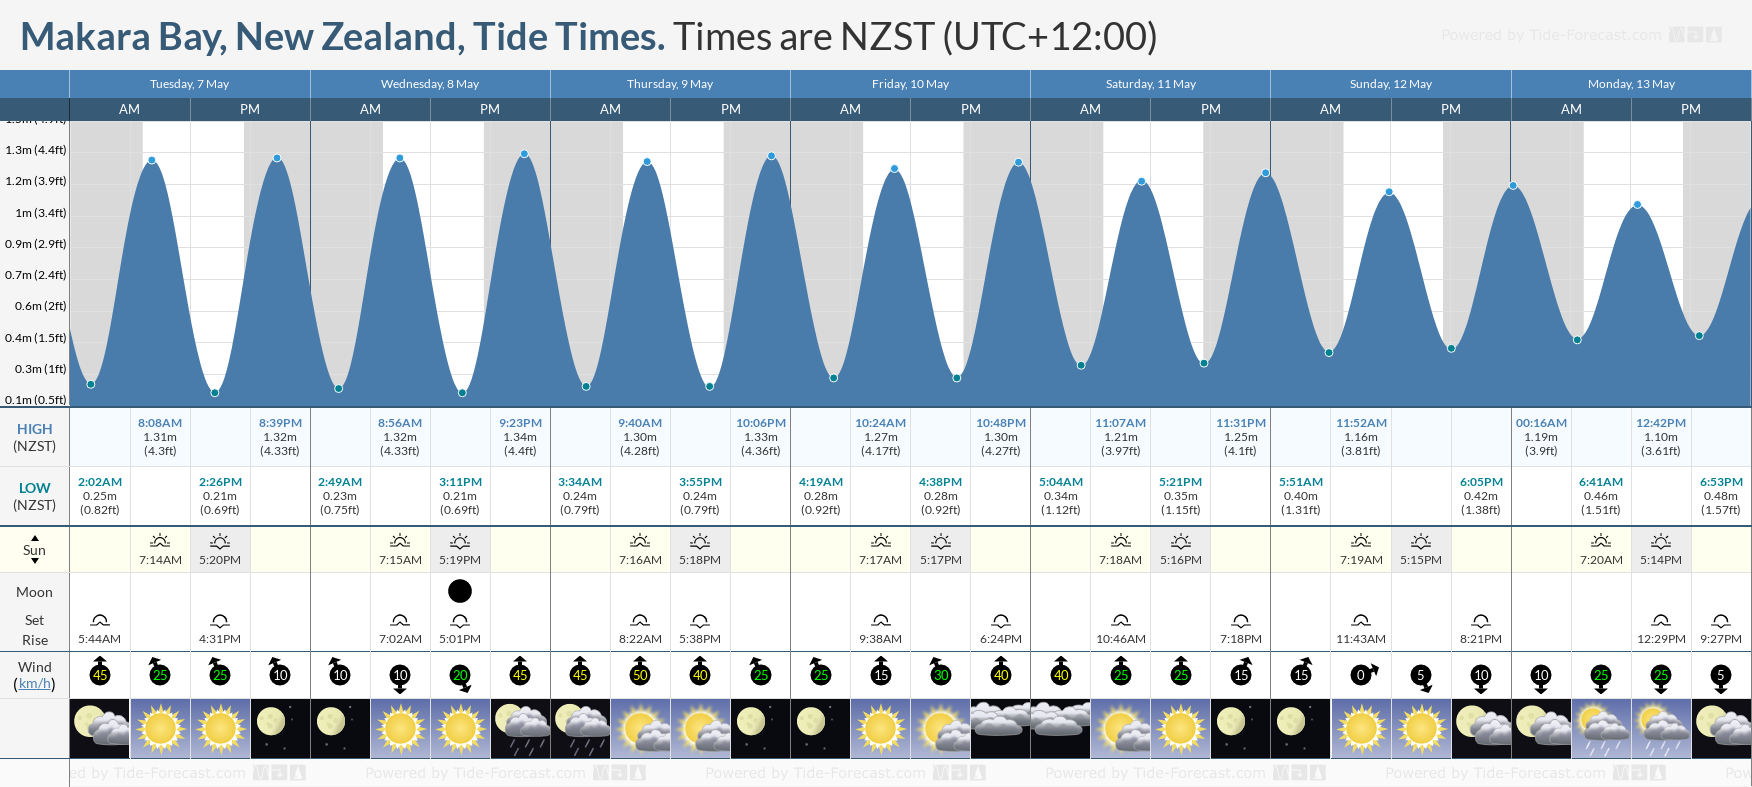 Makara Bay, New Zealand Tide Chart including high and low tide tide times for the next 7 days